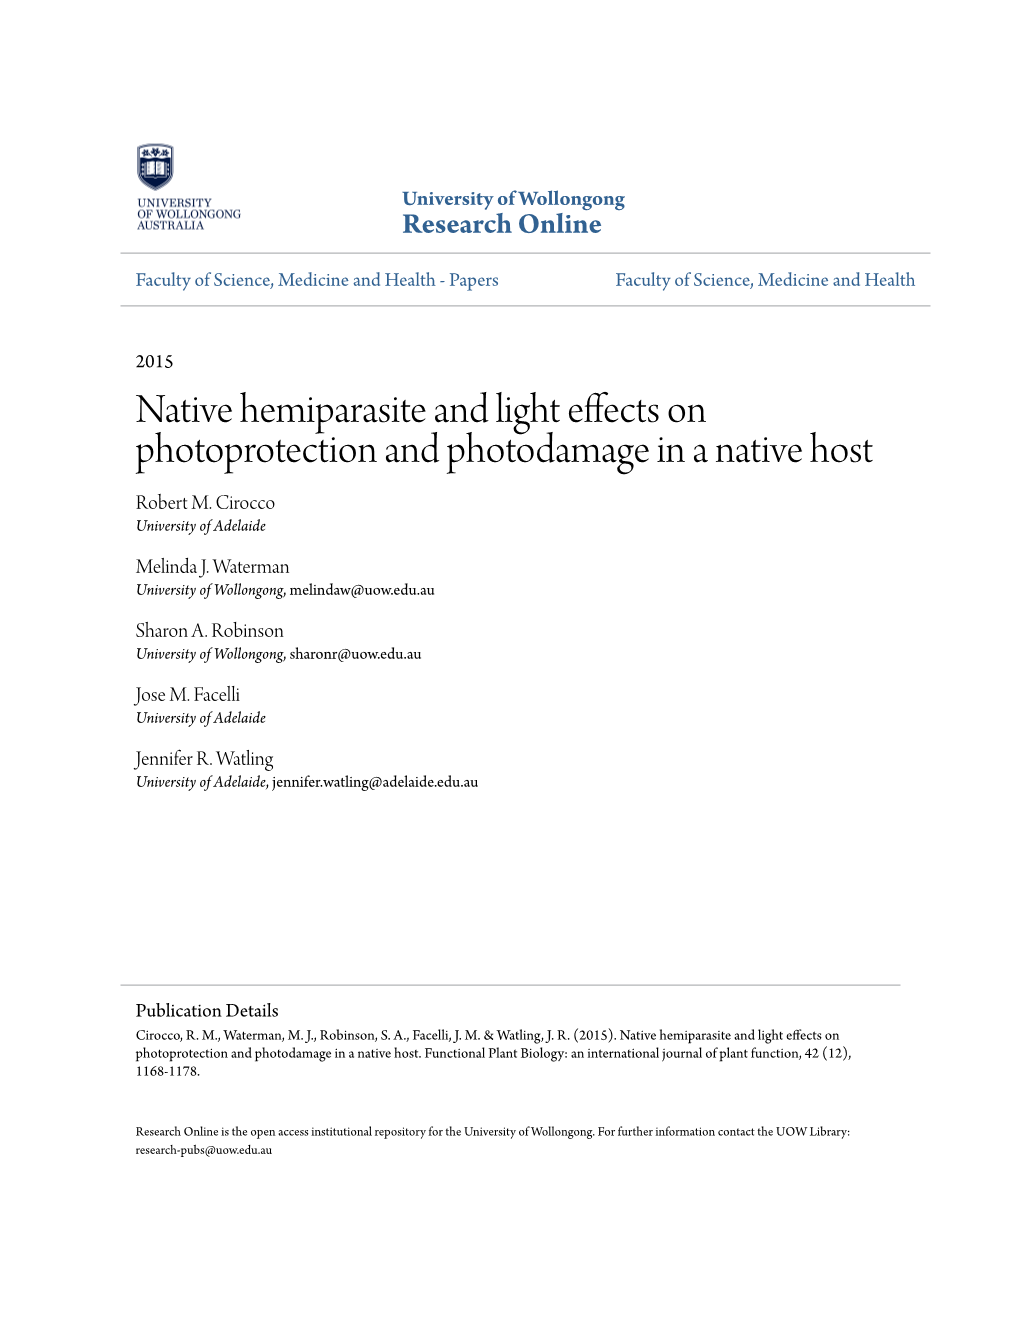 Native Hemiparasite and Light Effects on Photoprotection and Photodamage in a Native Host Robert M